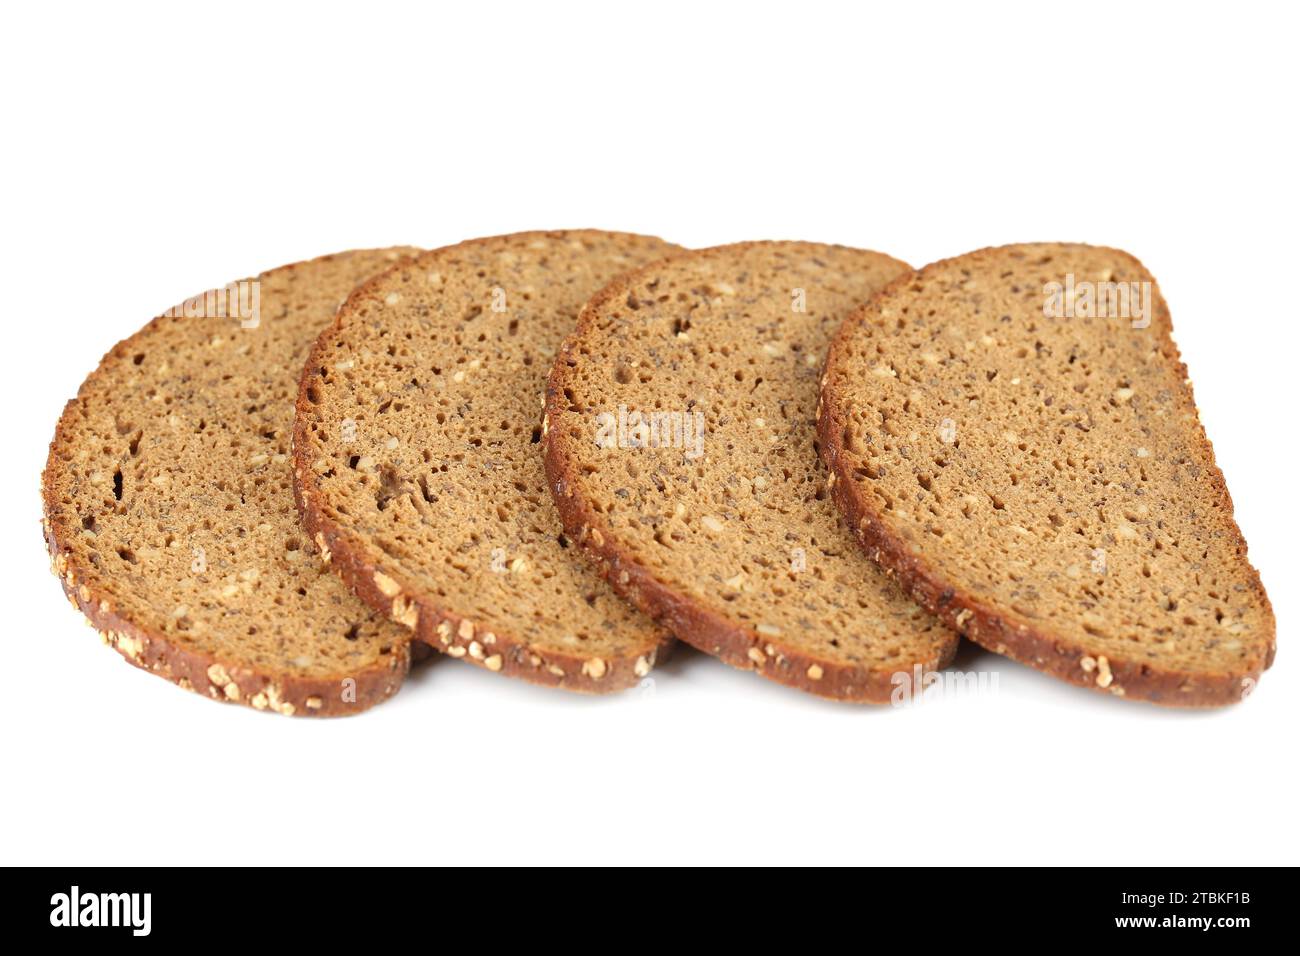 Bread slices with sunflower seeds and oat flakes isolated on white background. Stock Photo